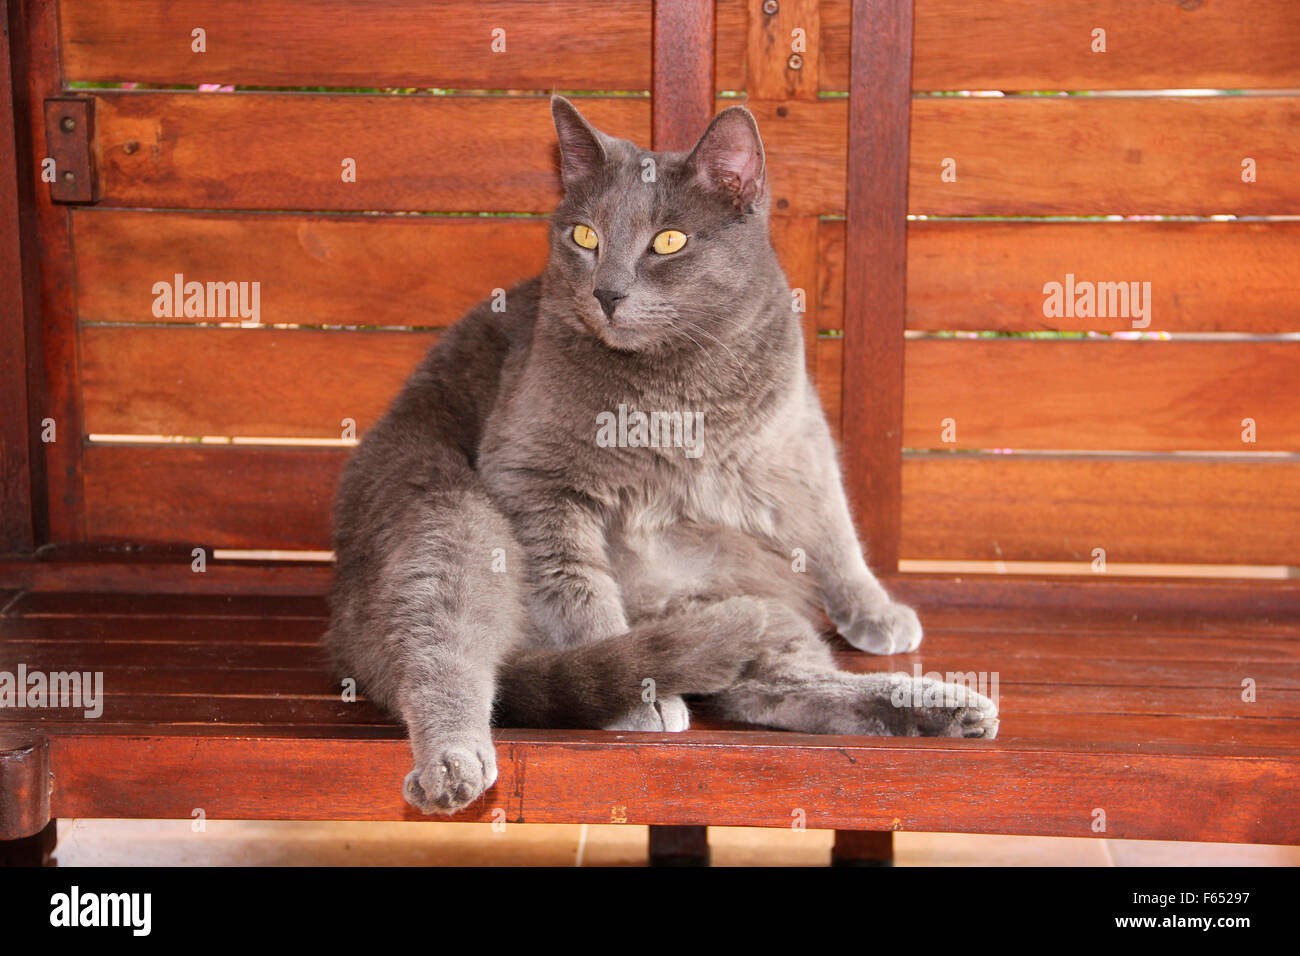 Domestic cat. Blue cat sitting on a wooden bench. Spain Stock Photo